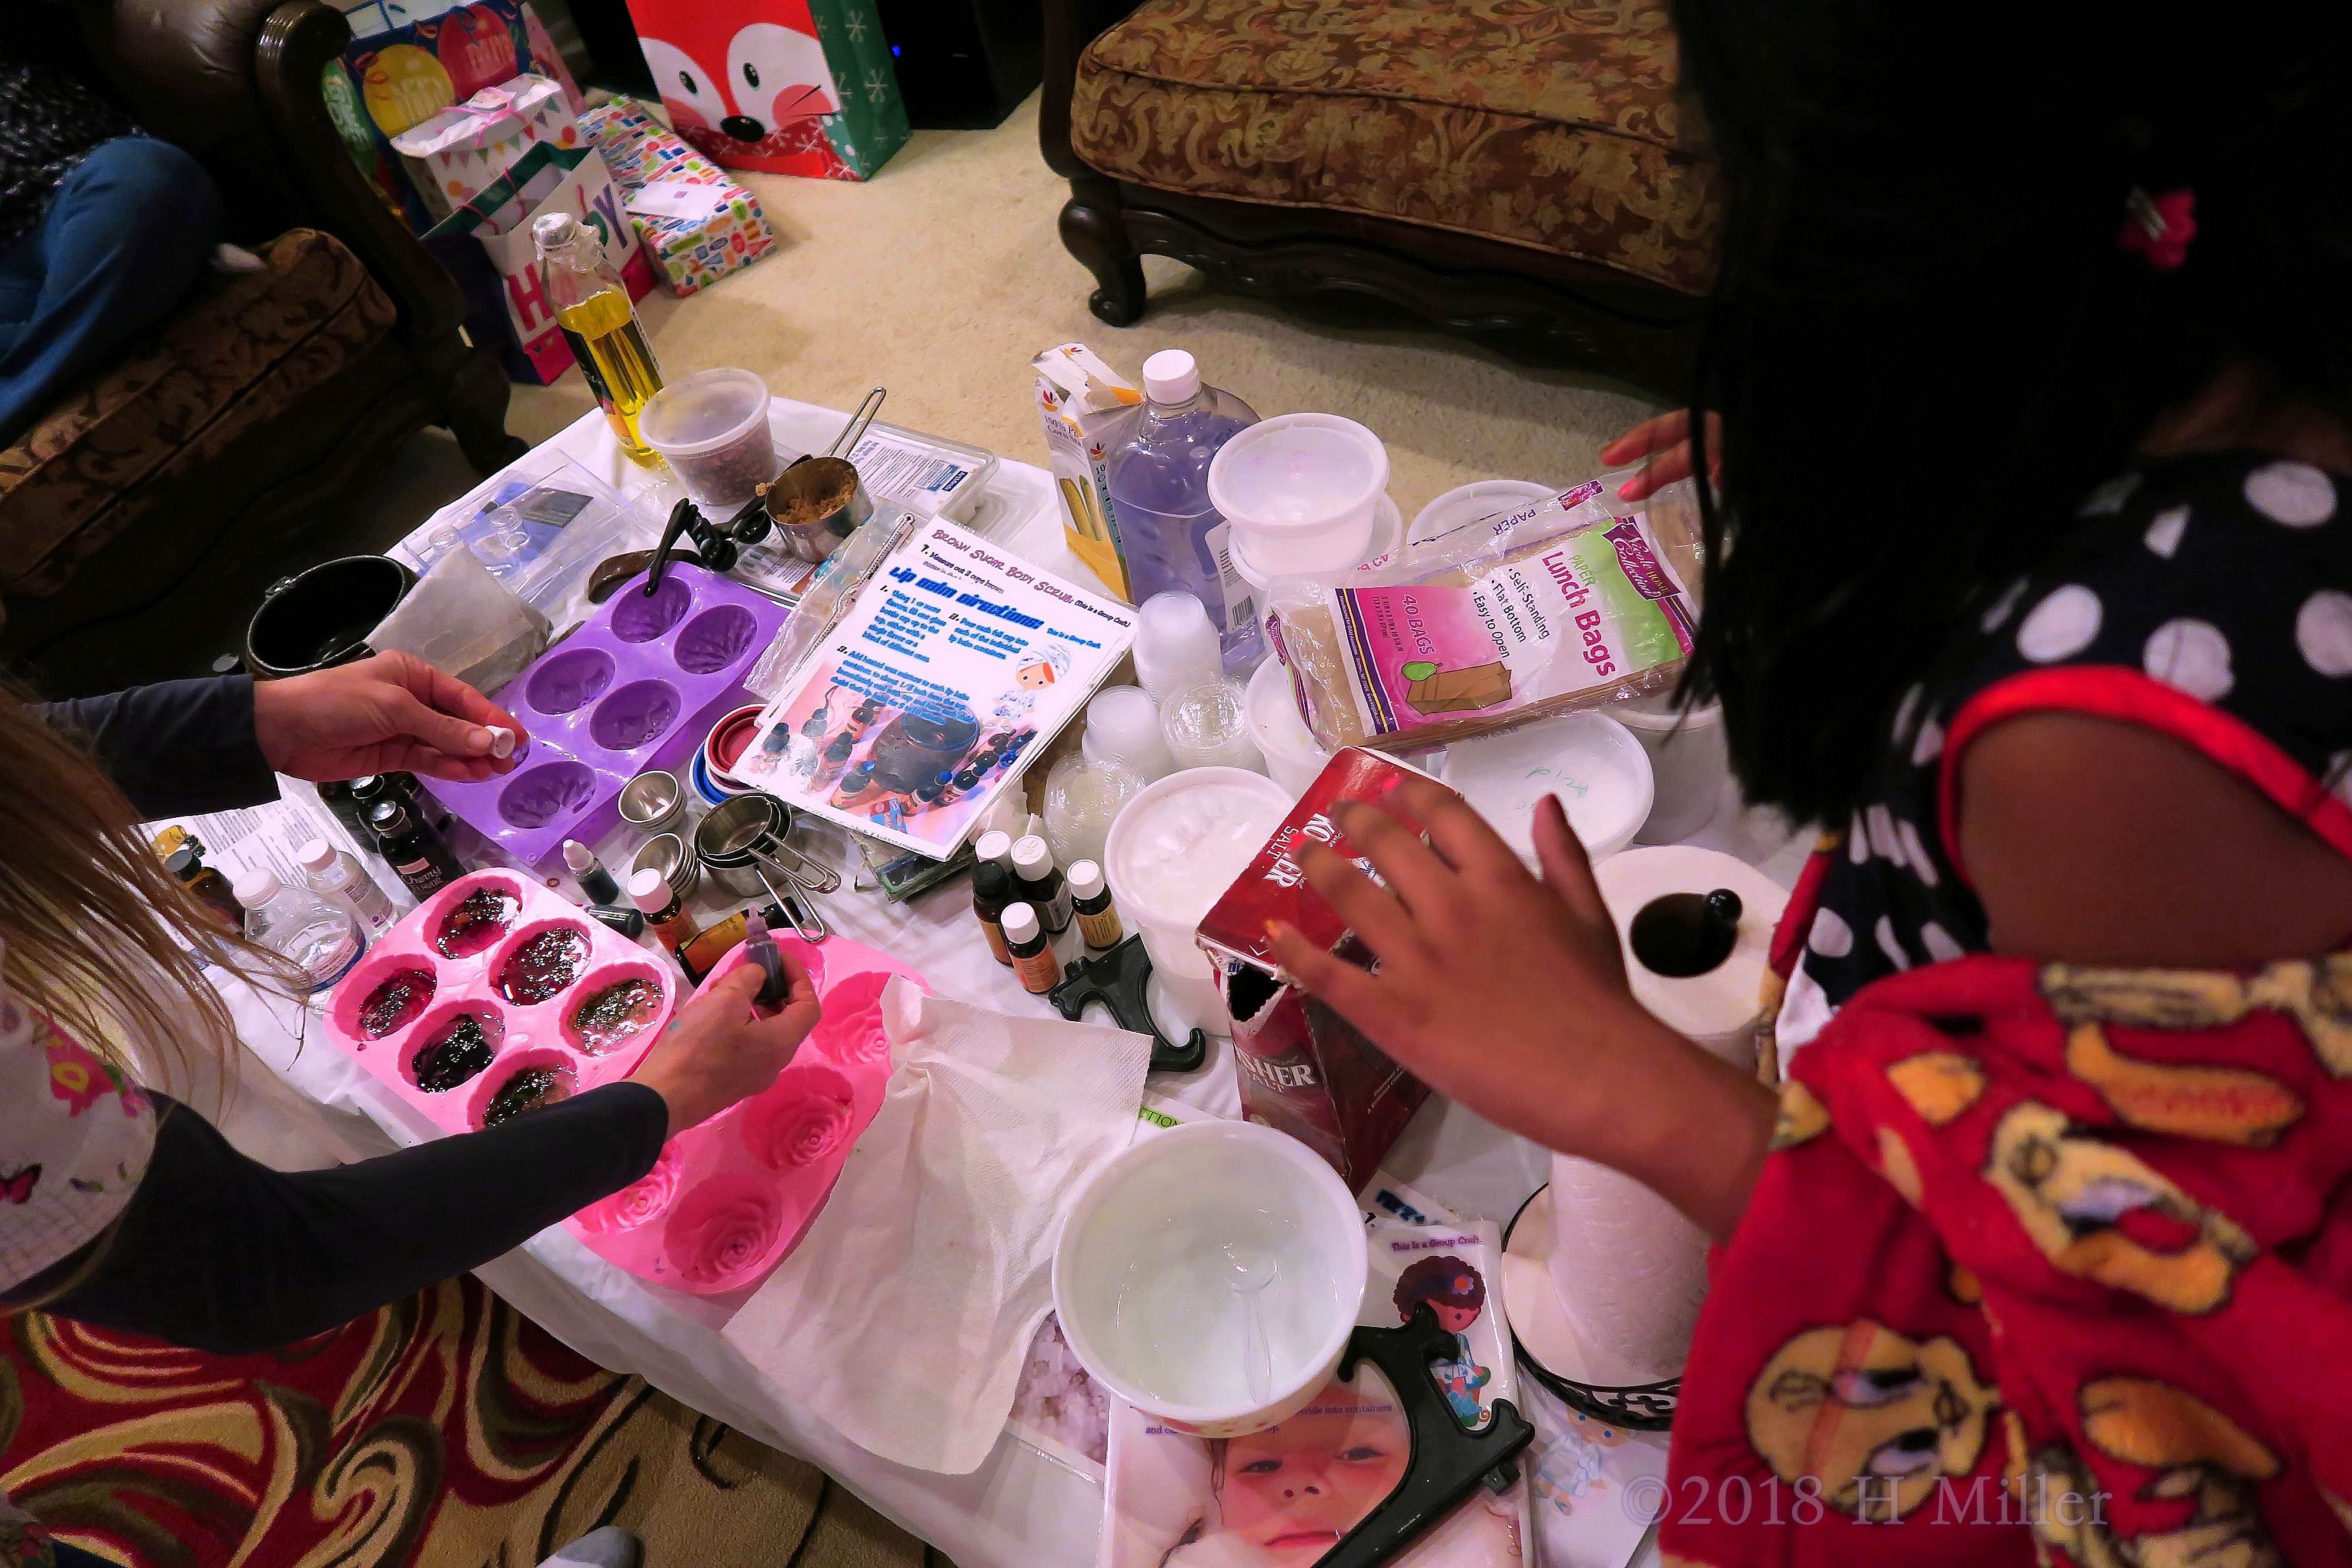 Preparations Of Kids Craft Activities Before The Spa Party Activities. 